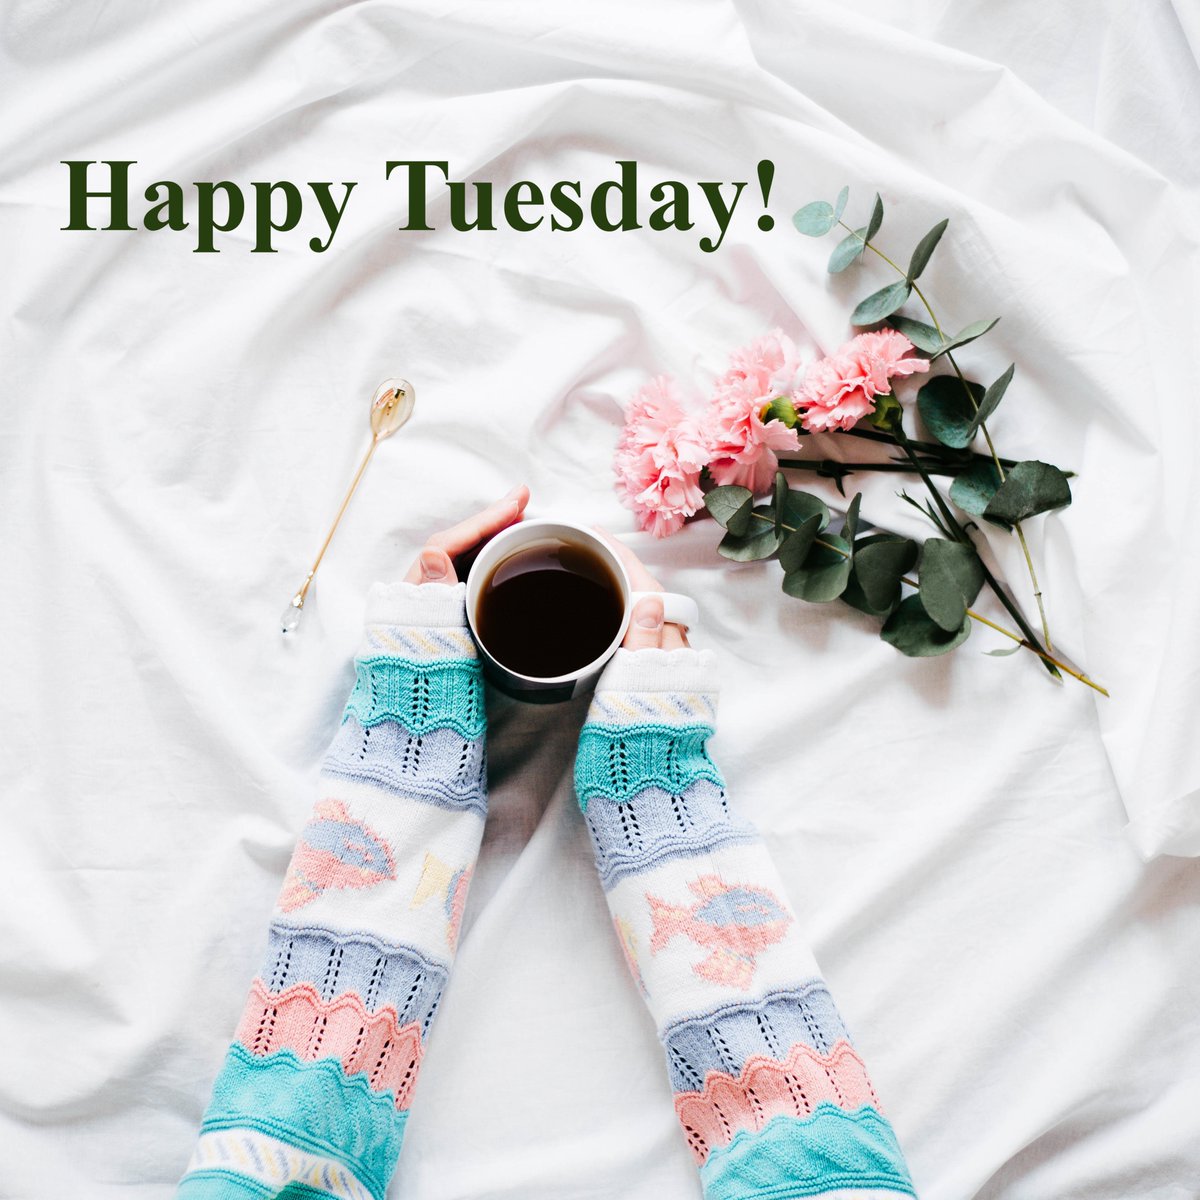 It's Tuesday! Hoping today is a good day! Let's do something kind to create a ripple effect of compassion. 🌷 #TuesdayMotivation #TuesdayMorning #JoyTRAIN #goodmorning #coffeelovers #health #Compassion